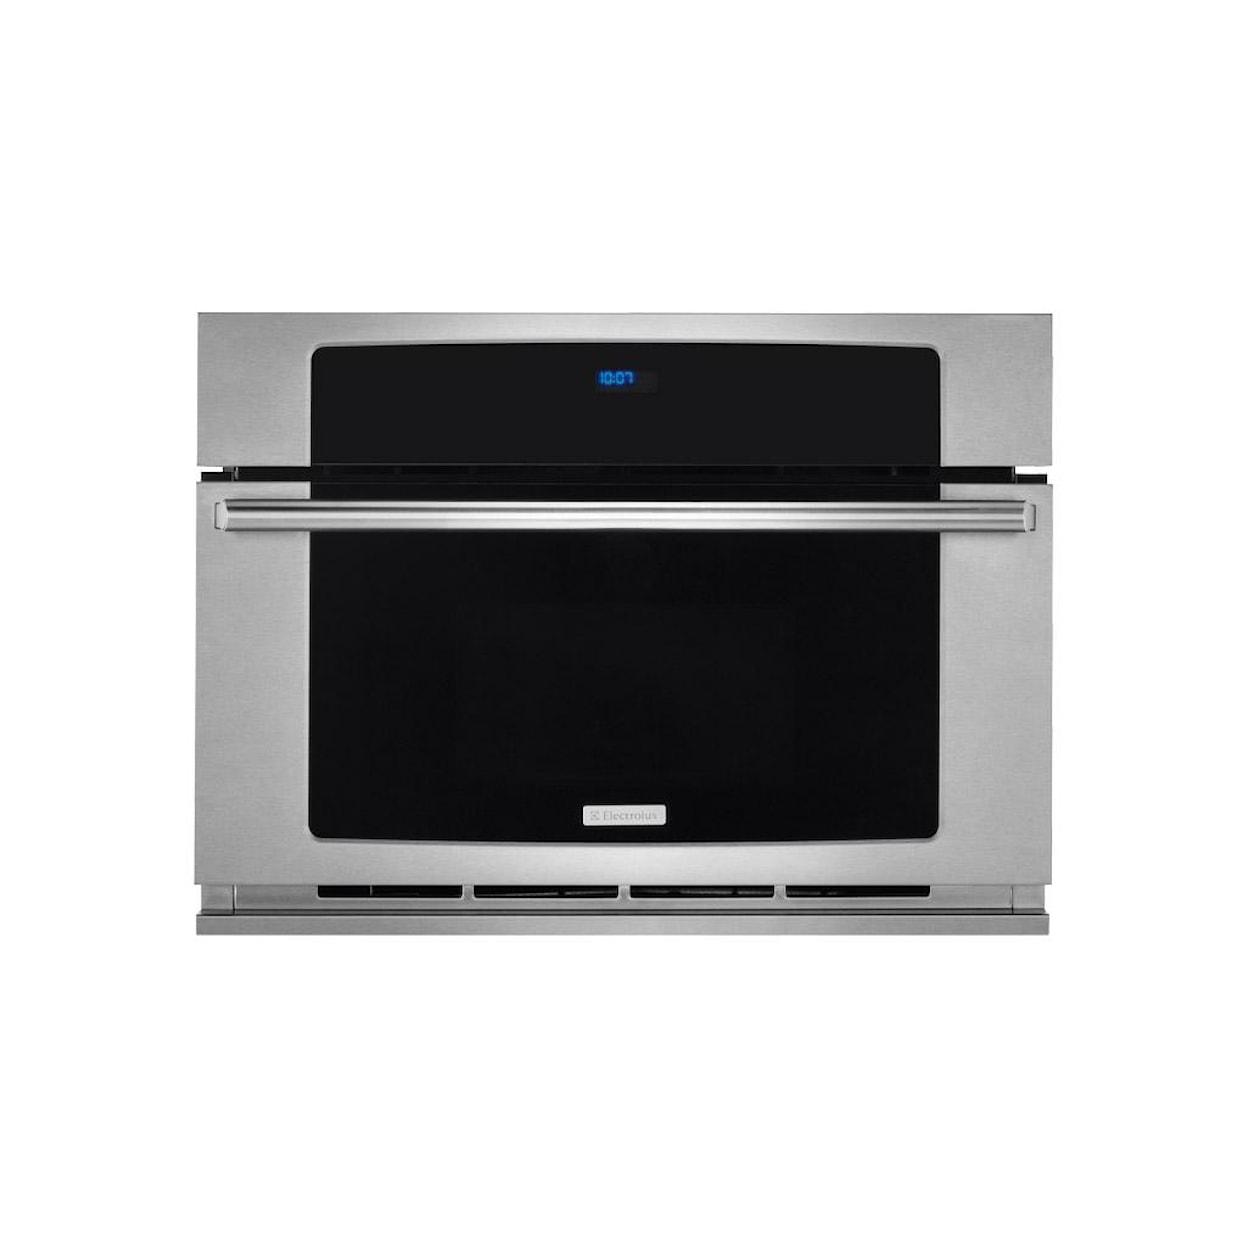 Electrolux Microwaves 2014 30" Built-In Convection Microwave Oven with 